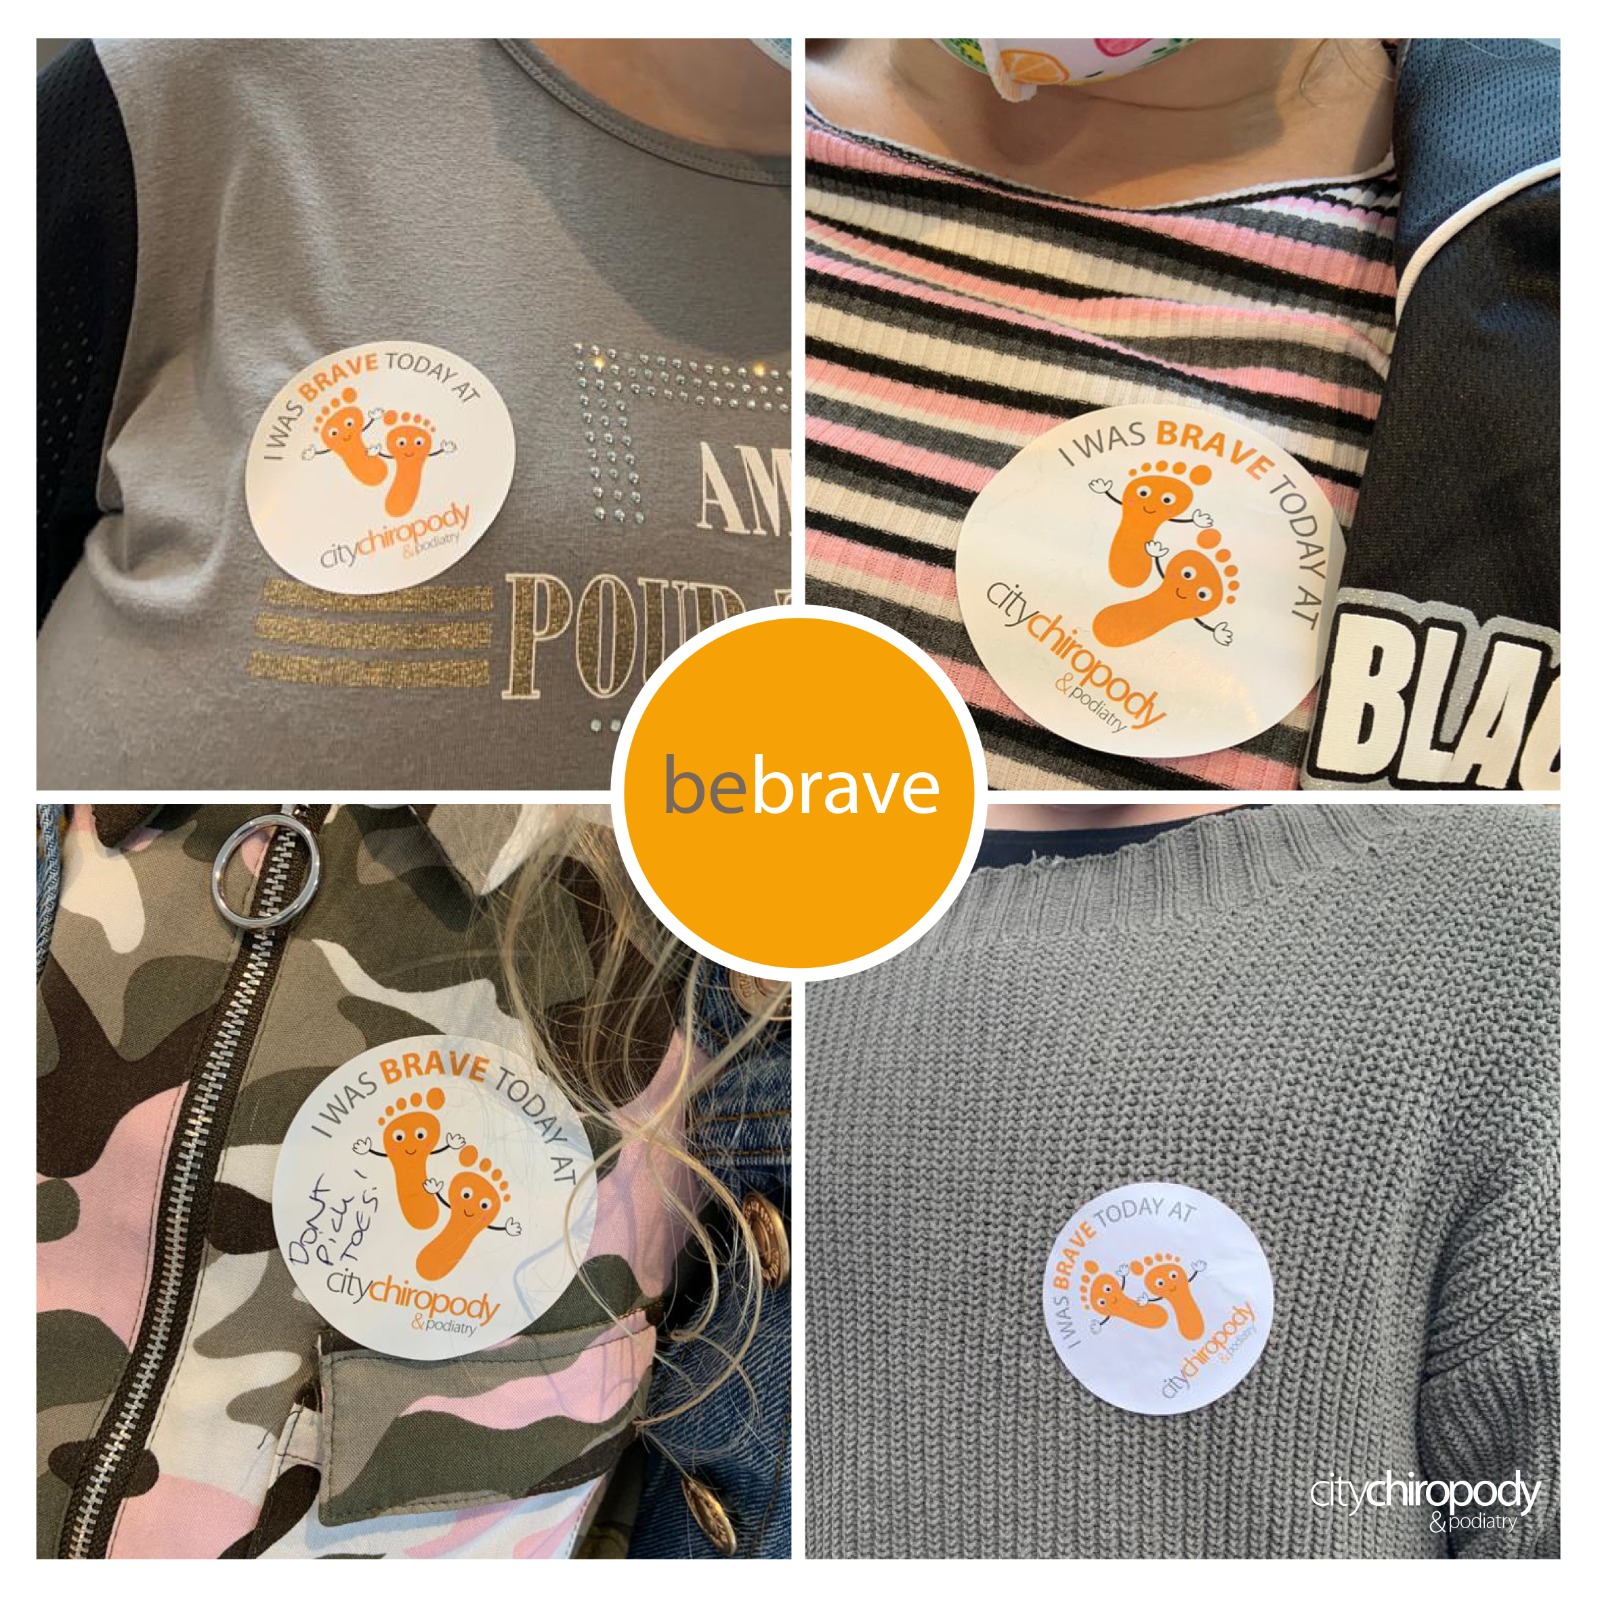 Free Stickers for Brave Patients